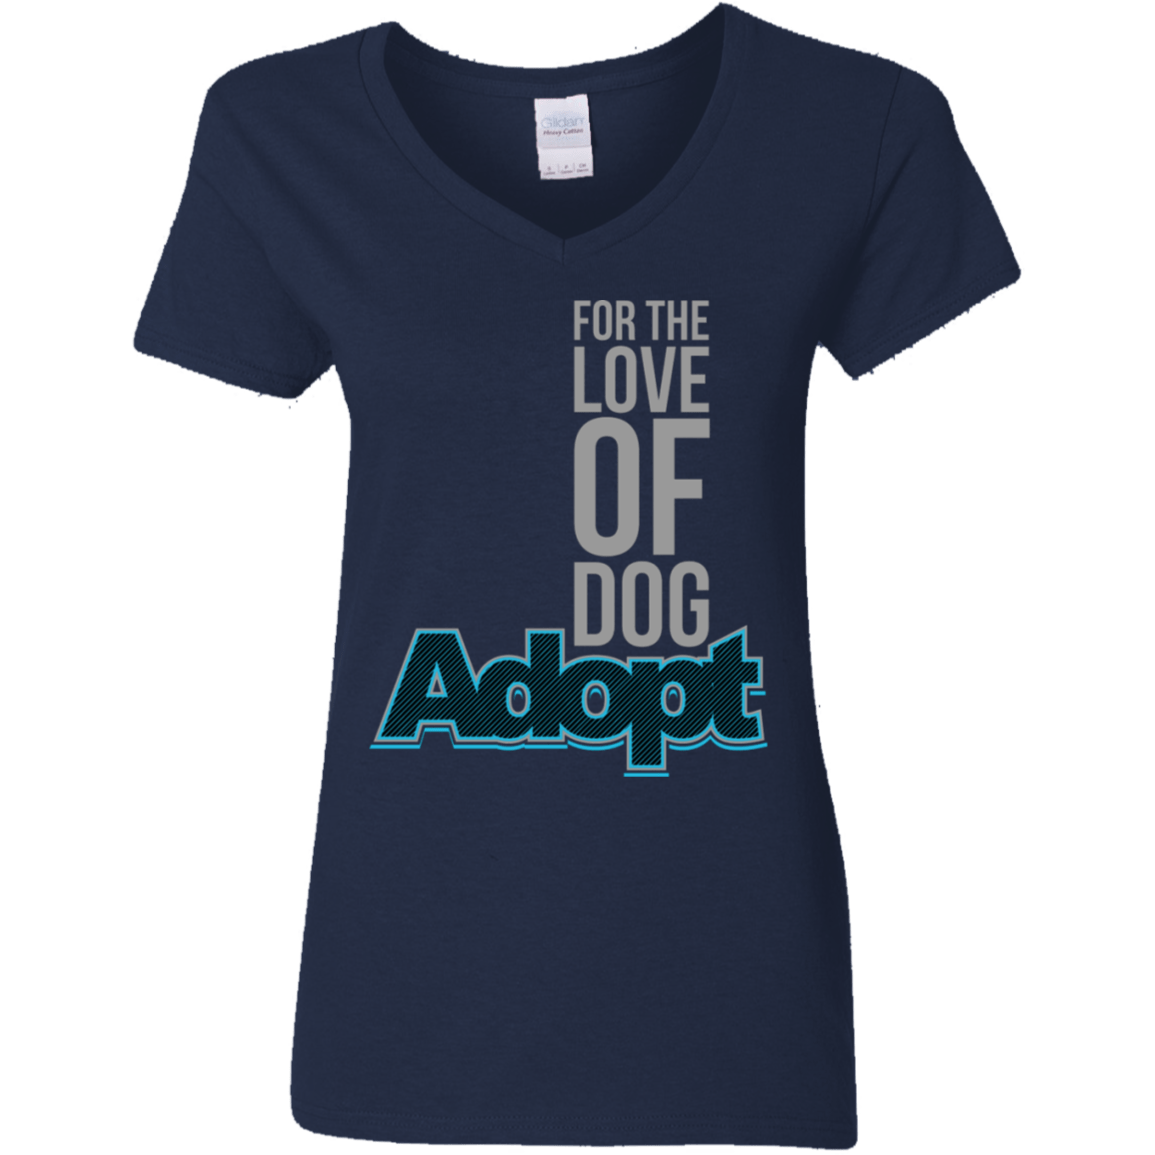 For The Love Of Dog Adopt - Ladies V Neck.